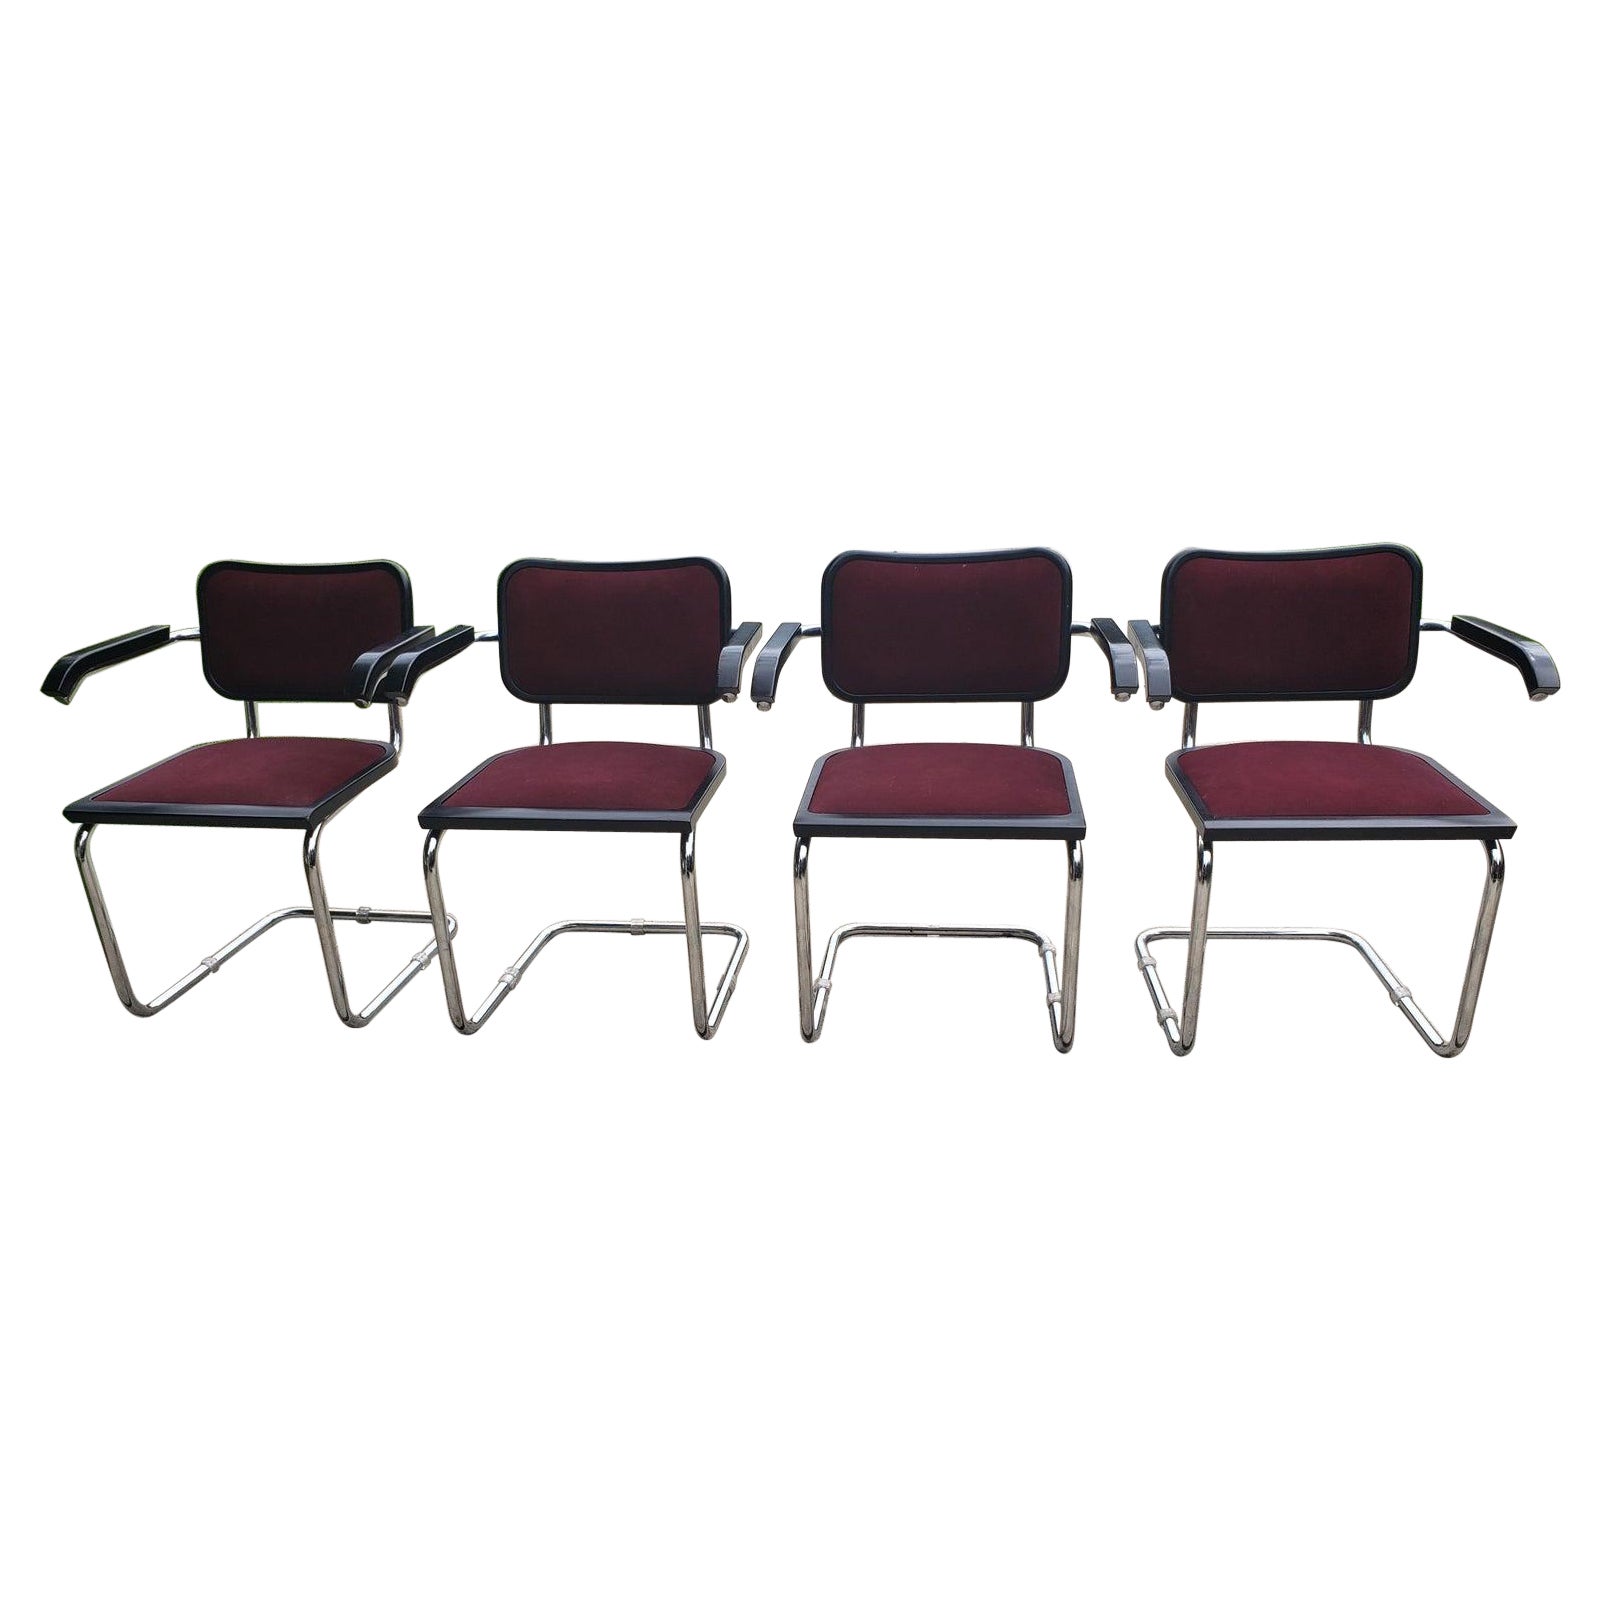 1970s Marcel Breuer Iconic S64 Chairs by Gordon International, a Set of 4 For Sale